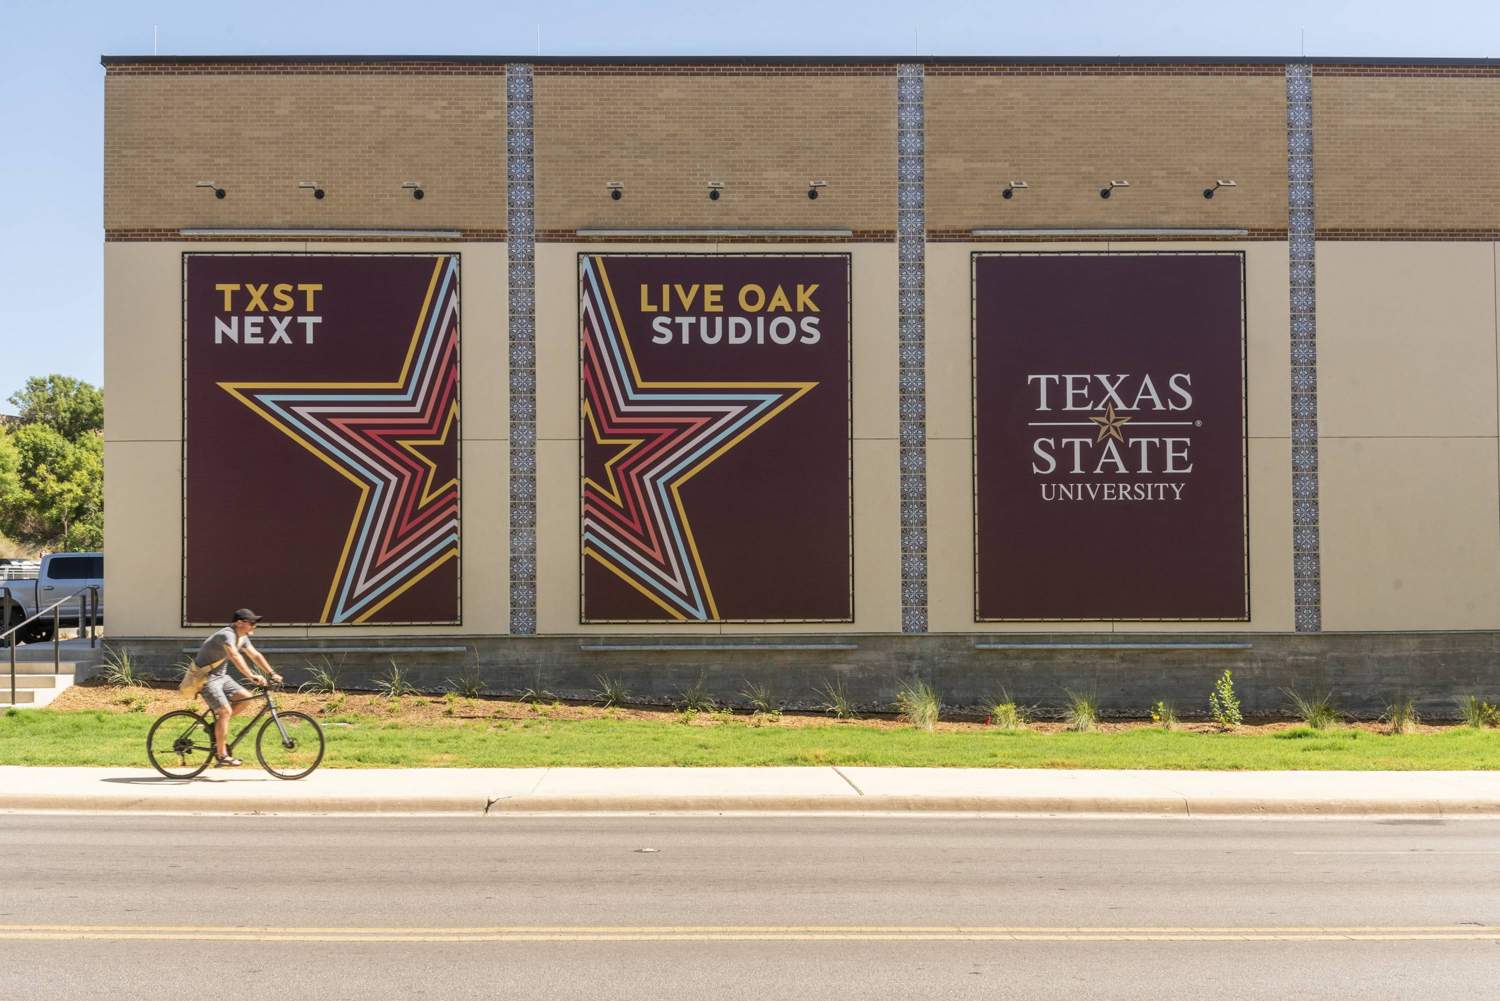 Three big banners hanging on a new building feature TXST branding and brightly colored line art of a star over a field of maroon.